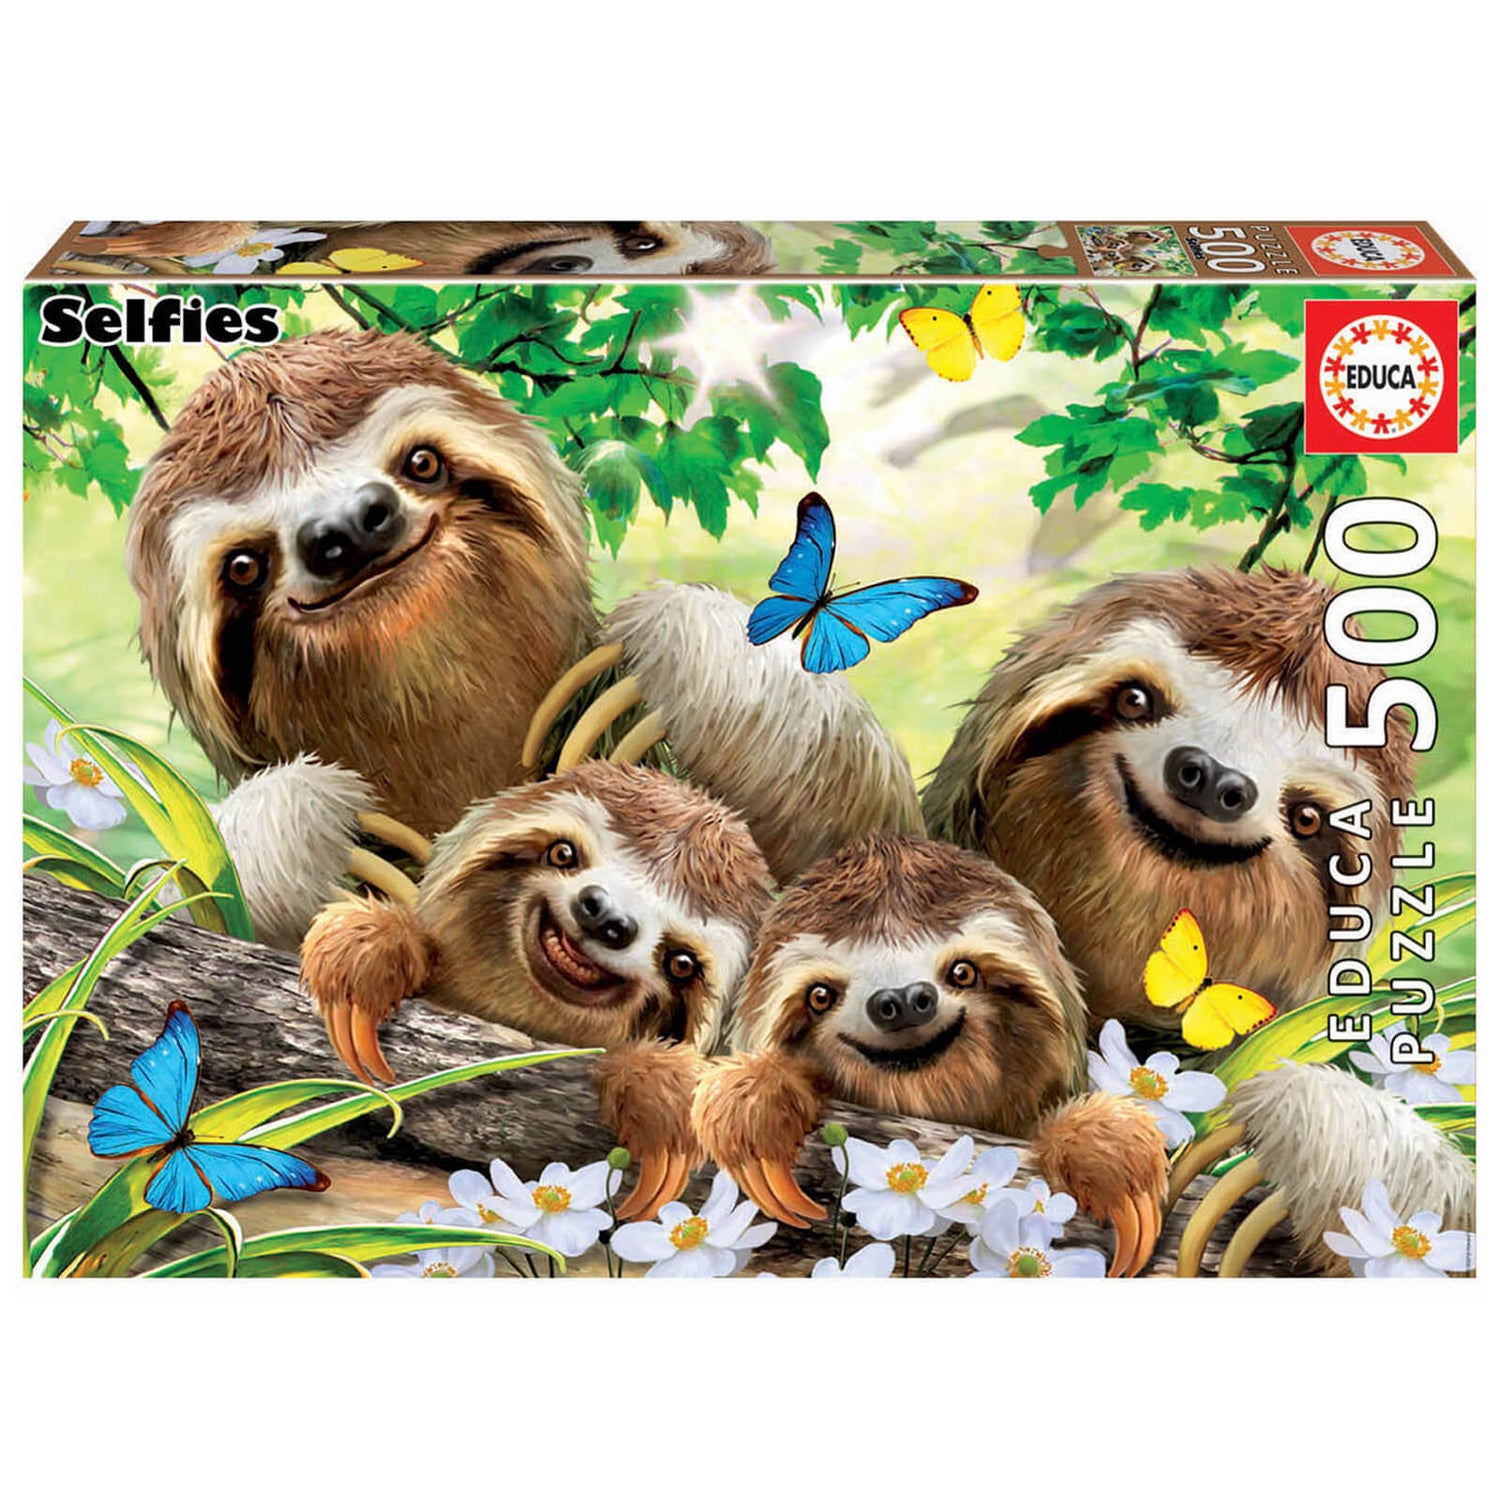 Sloth Family Selfie Jigsaw Puzzle (500 Pieces)